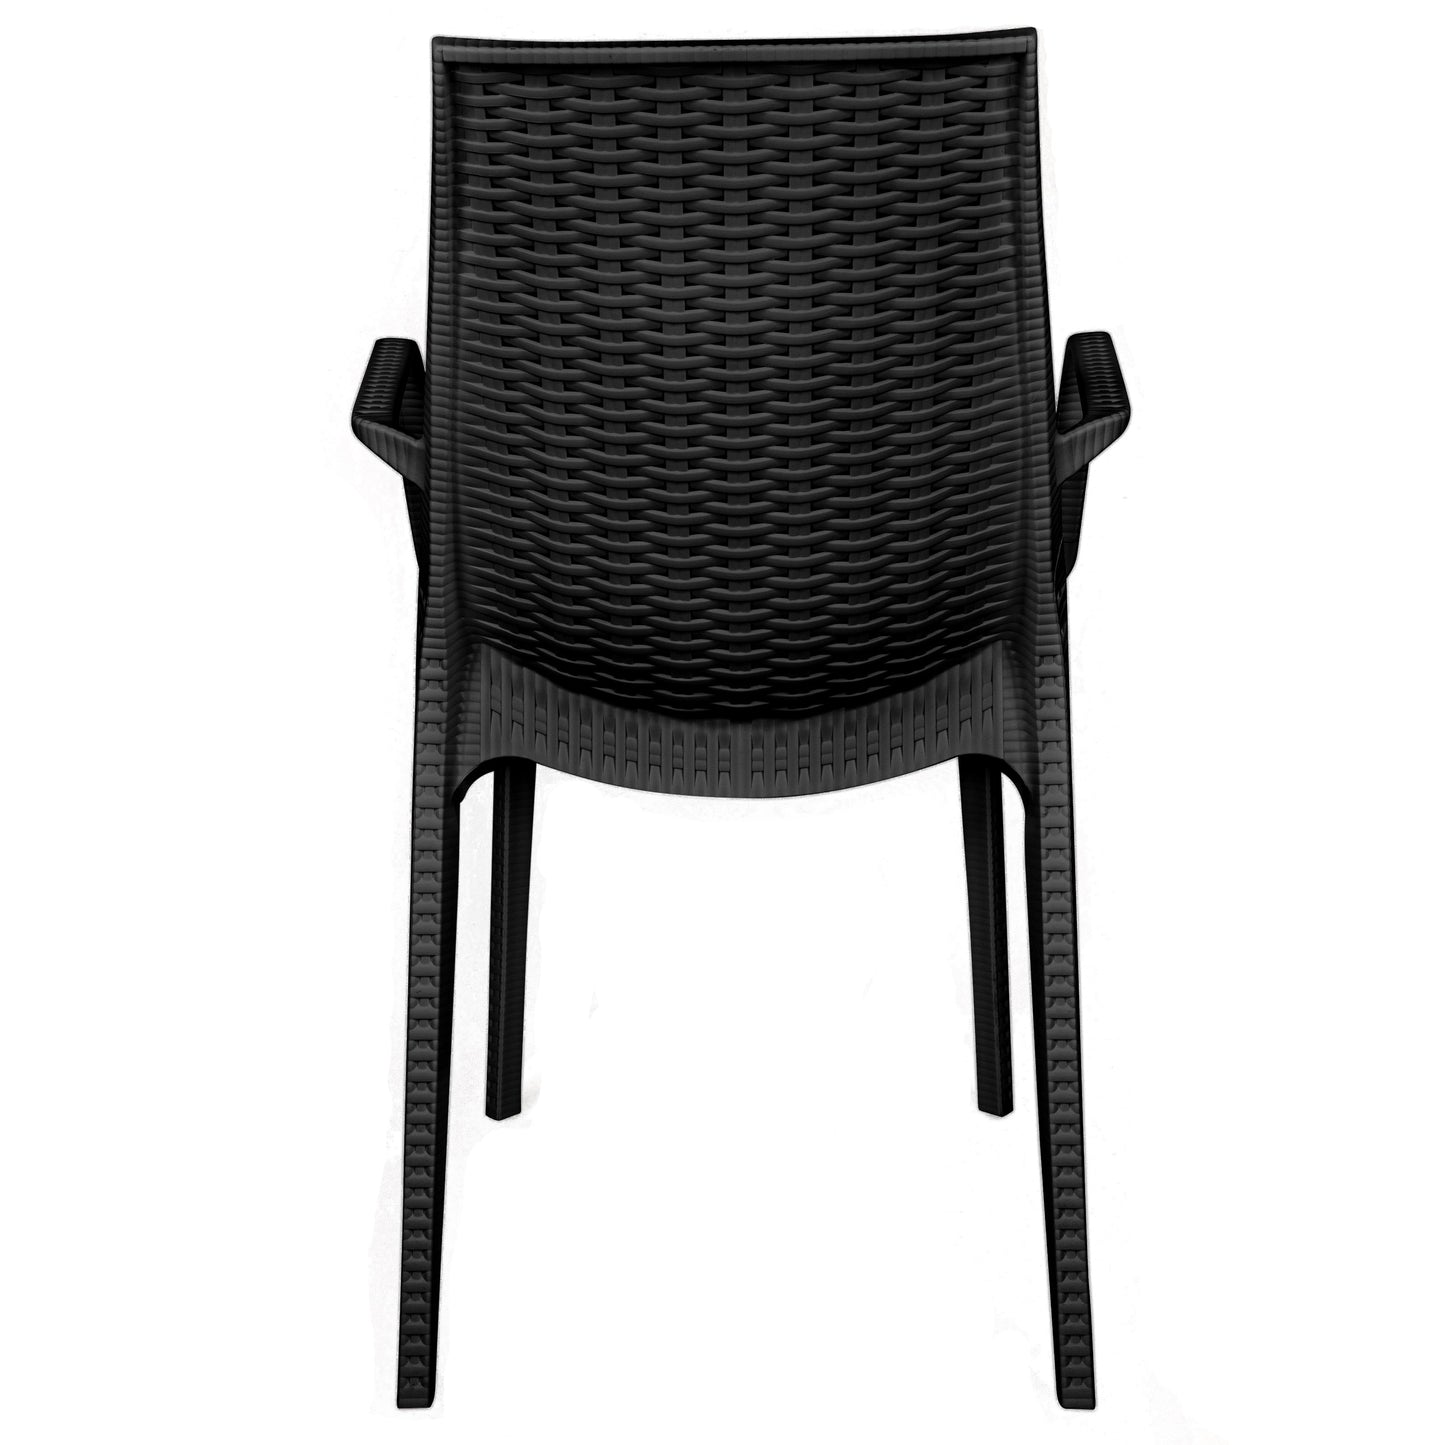 Anders Outdoor Patio Plastic Dining Arm Chair - Set of 4